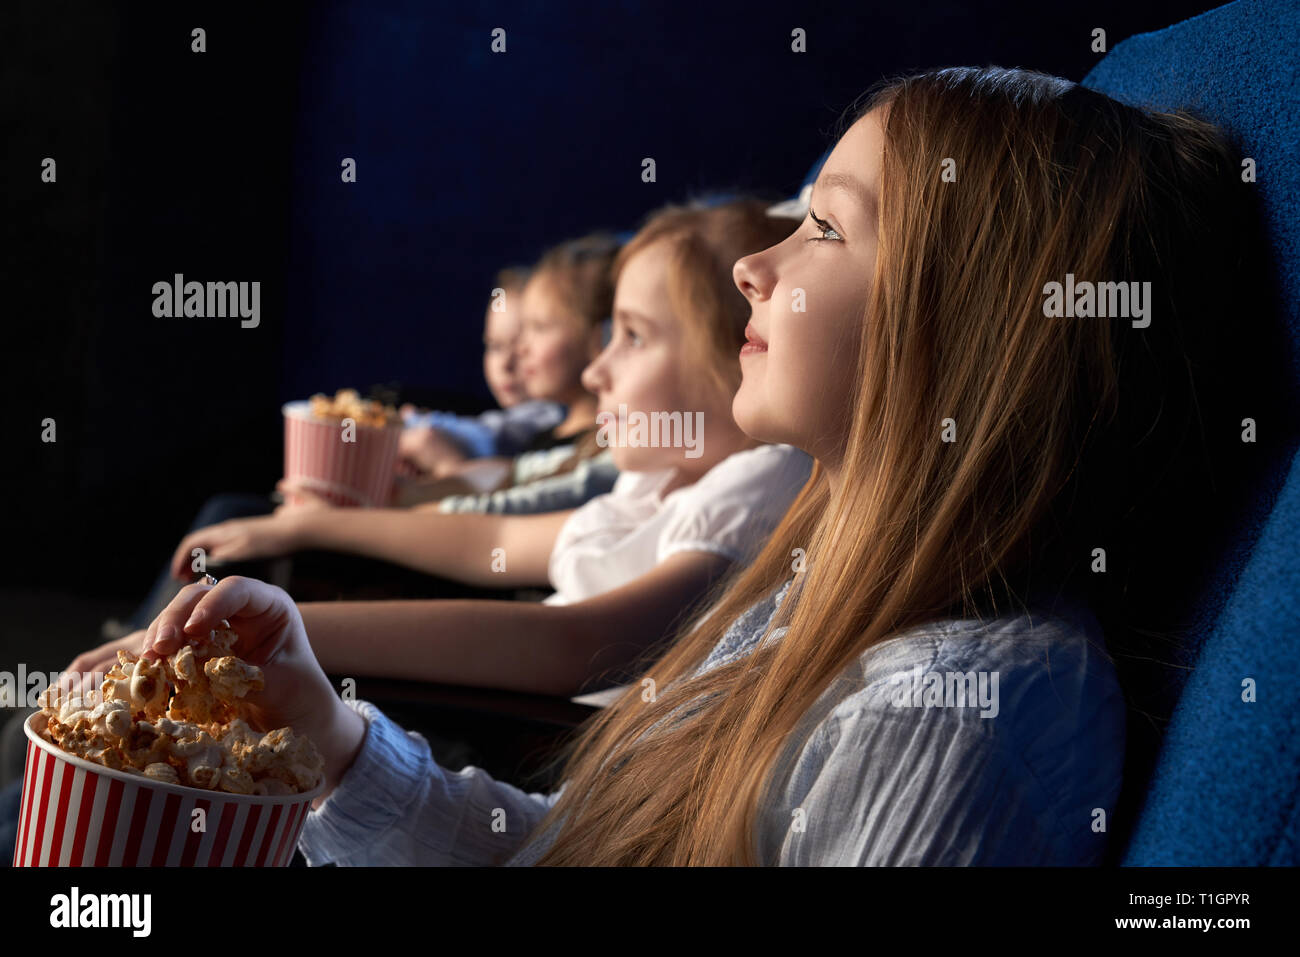 Kids sitting in comfortable chairs of movie theatre, watching attentively movie or cartoon. Beautiful girl holding popcorn bucket, enjoying film premiere. Stock Photo